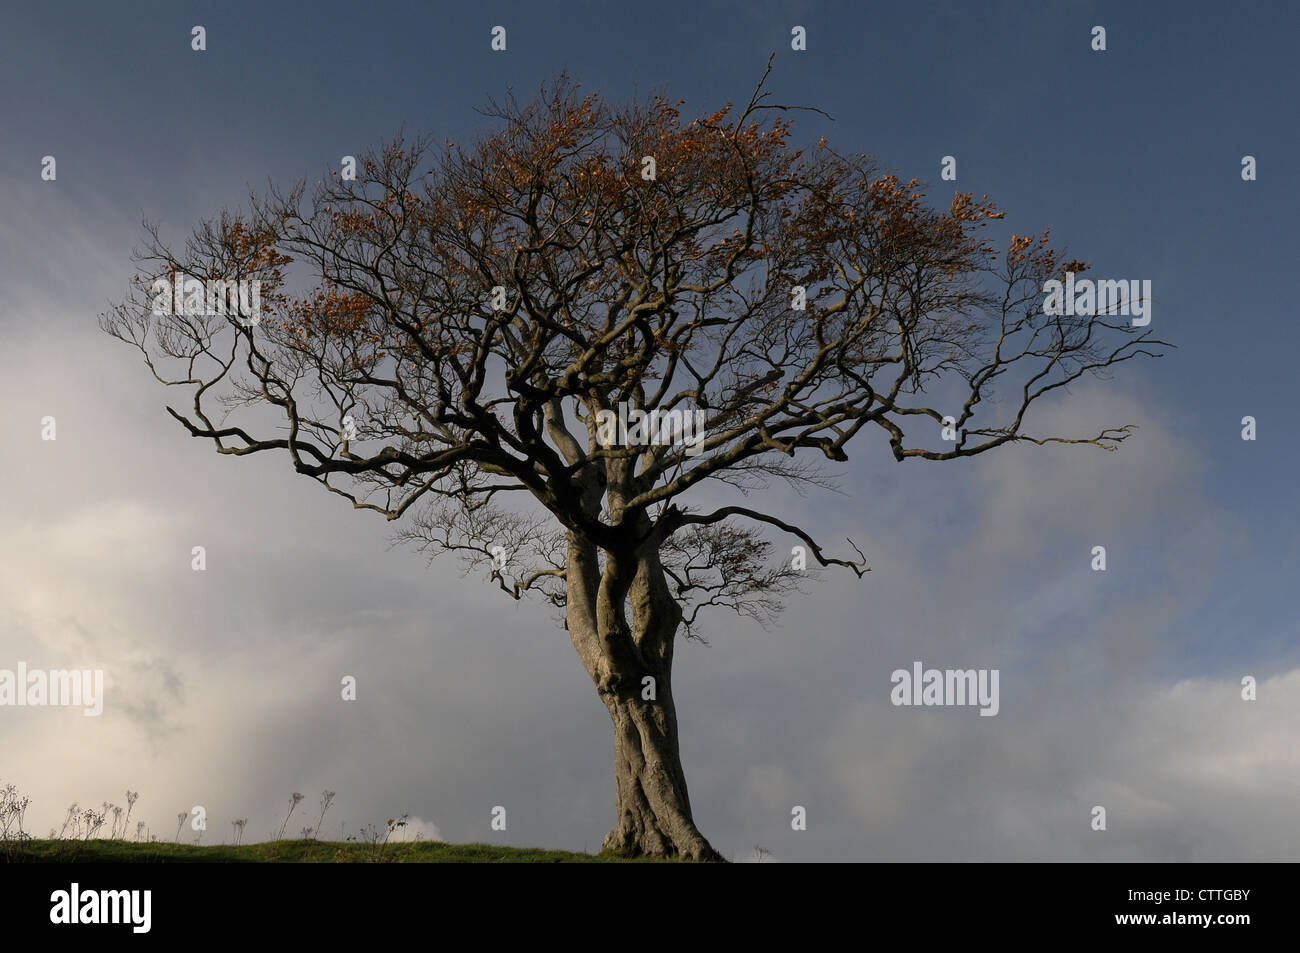 A Beech tree in winter with russet brown leaves & cloudy sky , Stackallan, Slane, County Meath, Ireland Stock Photo